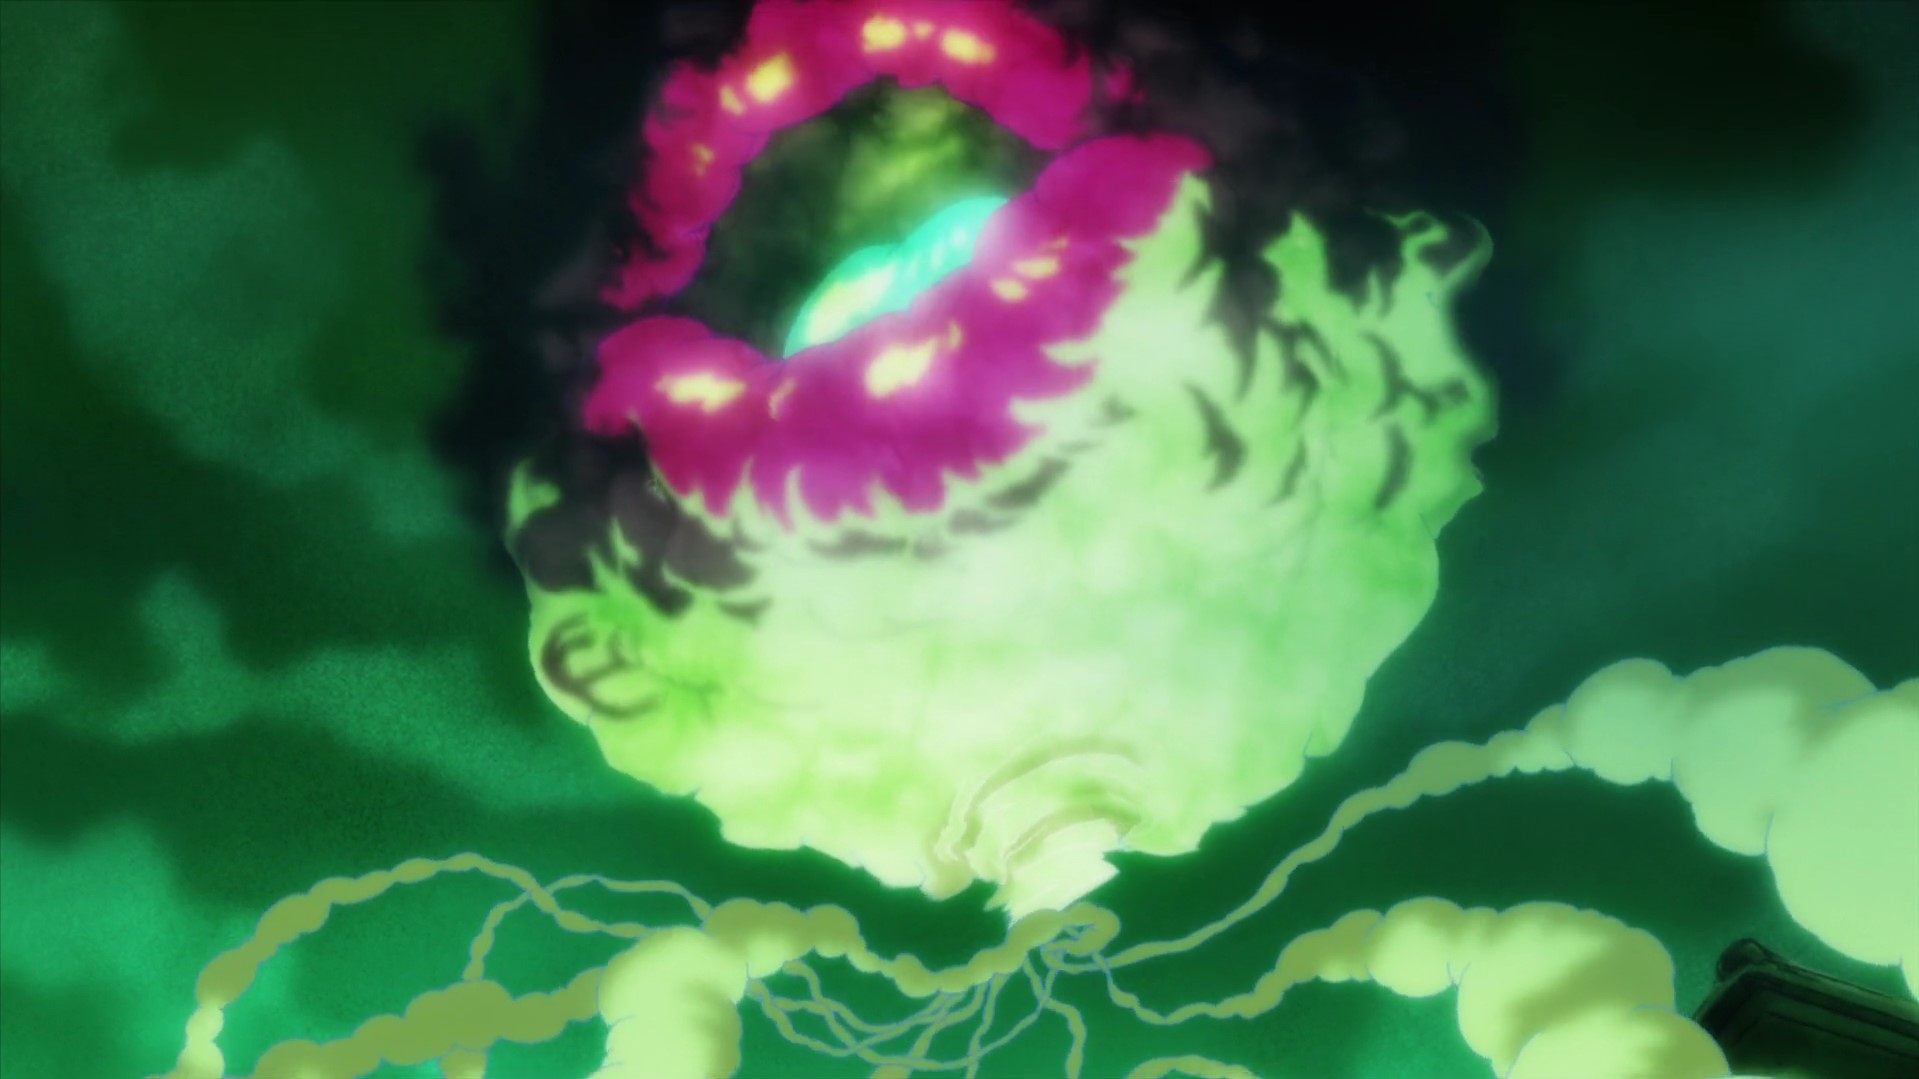 The evil spirit as seen in Mob Psycho 100